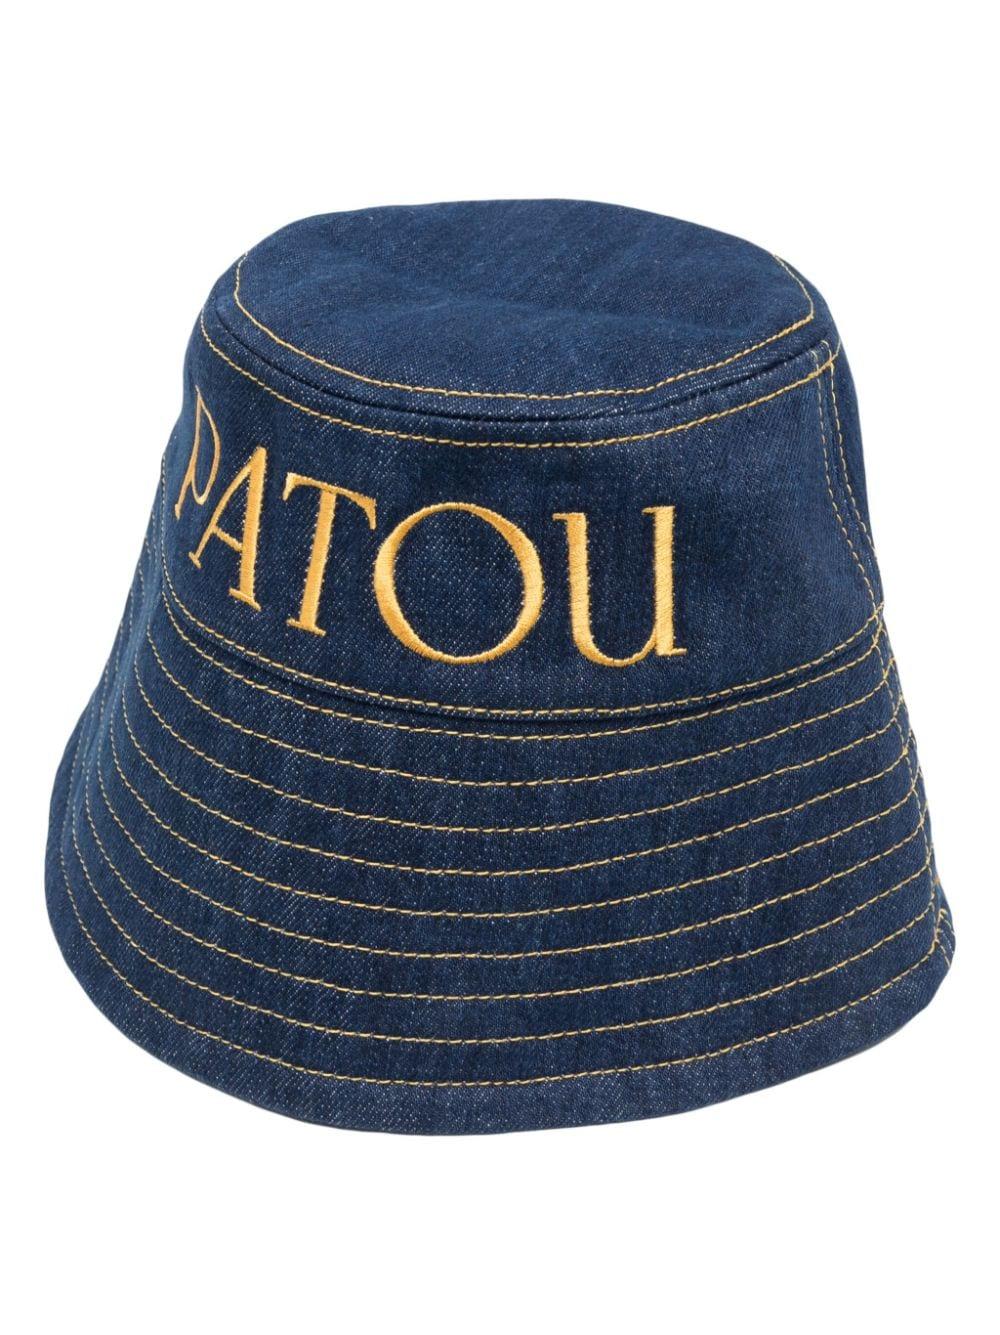 Patou Logo-embroidered Denim Bucket Hat in Blue | Lyst